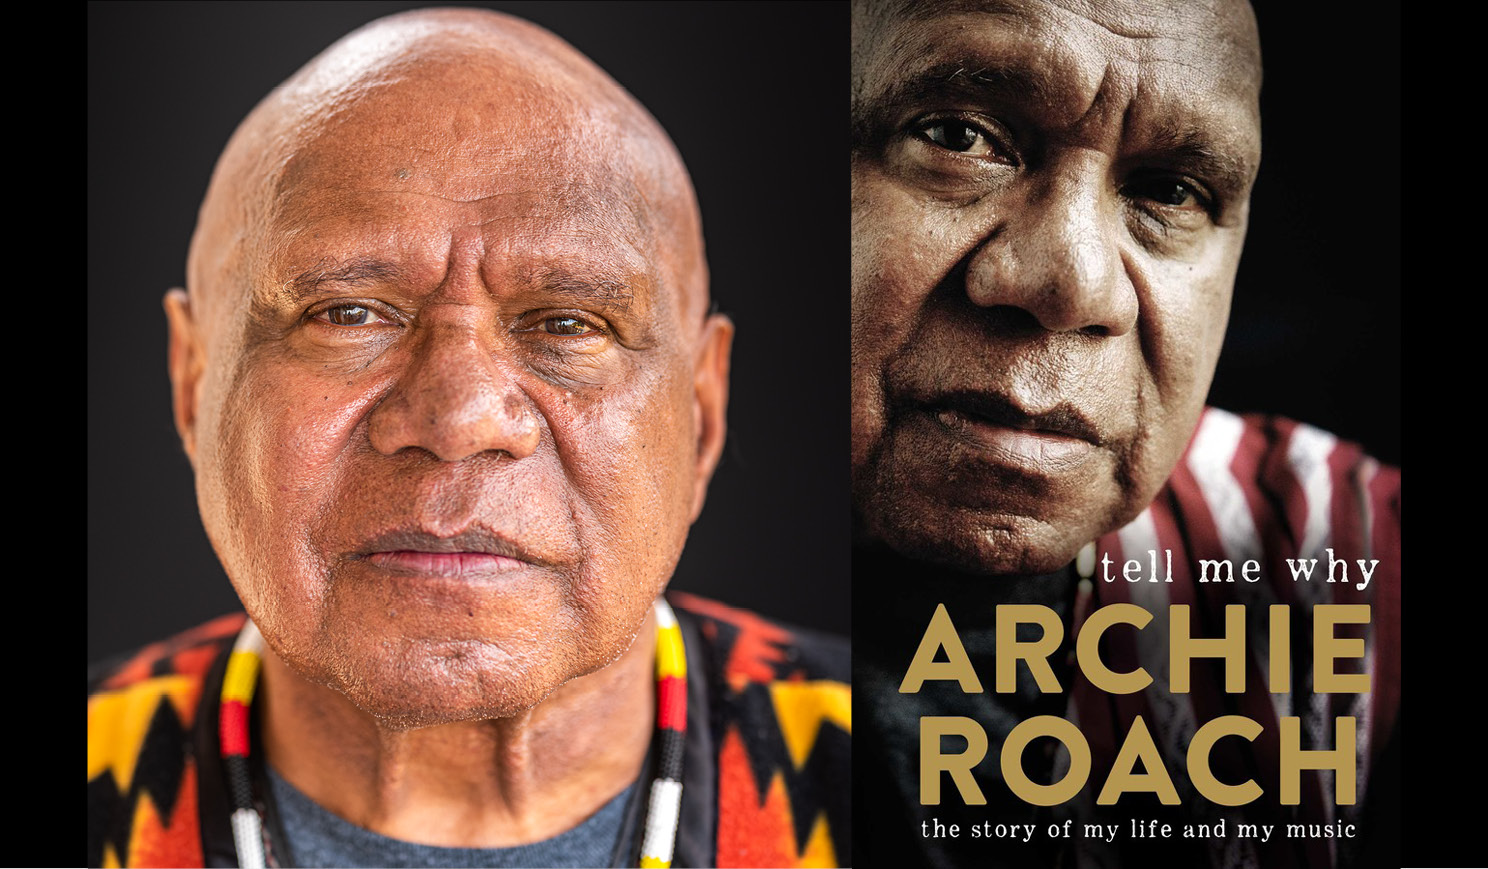 Archie Roach alongside the cover of his book